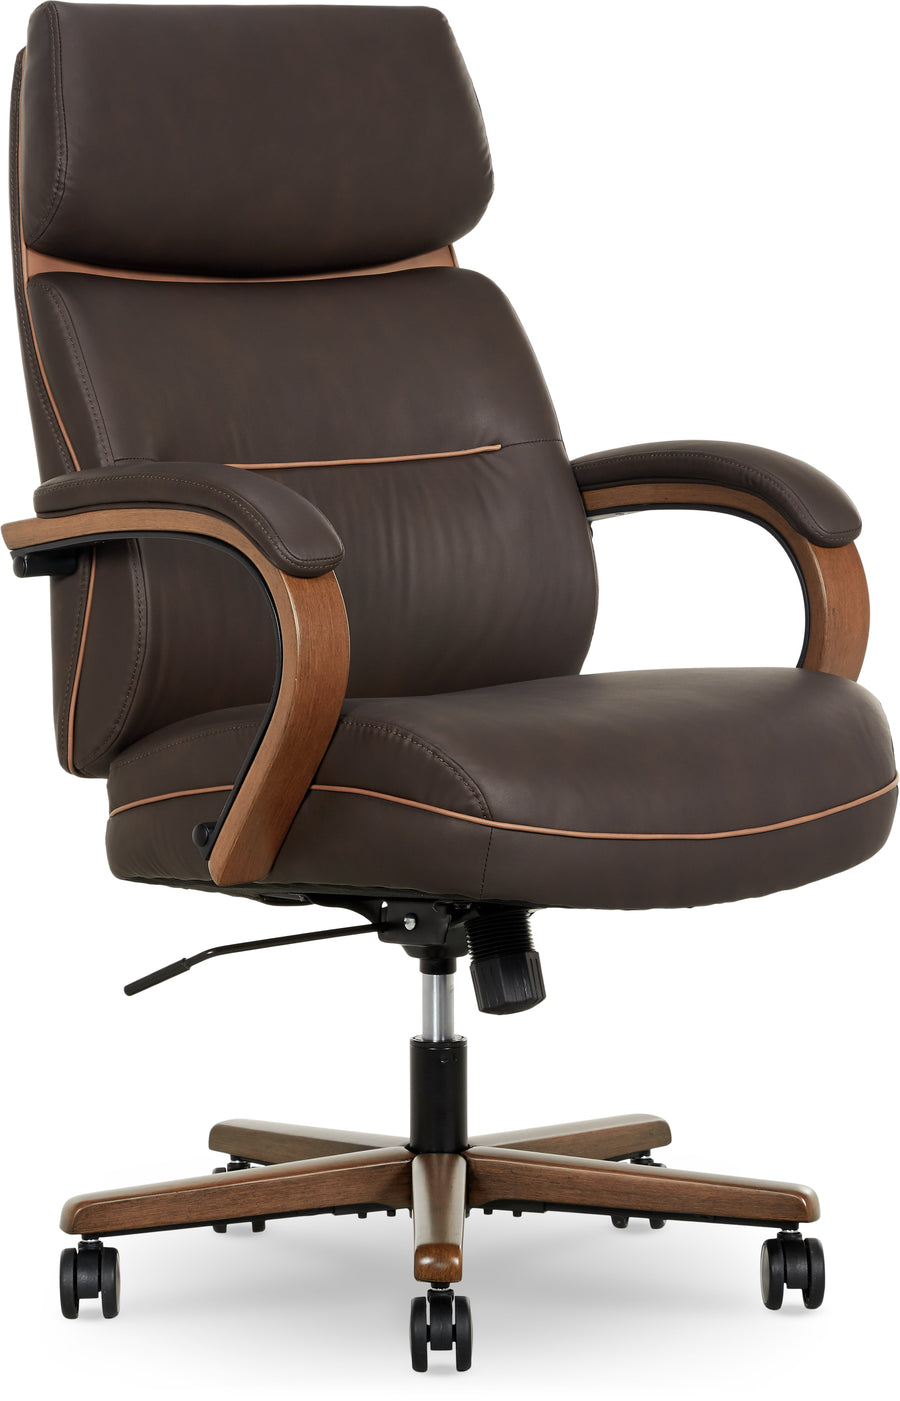 Finch Neo Two Retro-Modern Mid-Back Office Chair - Brown_0